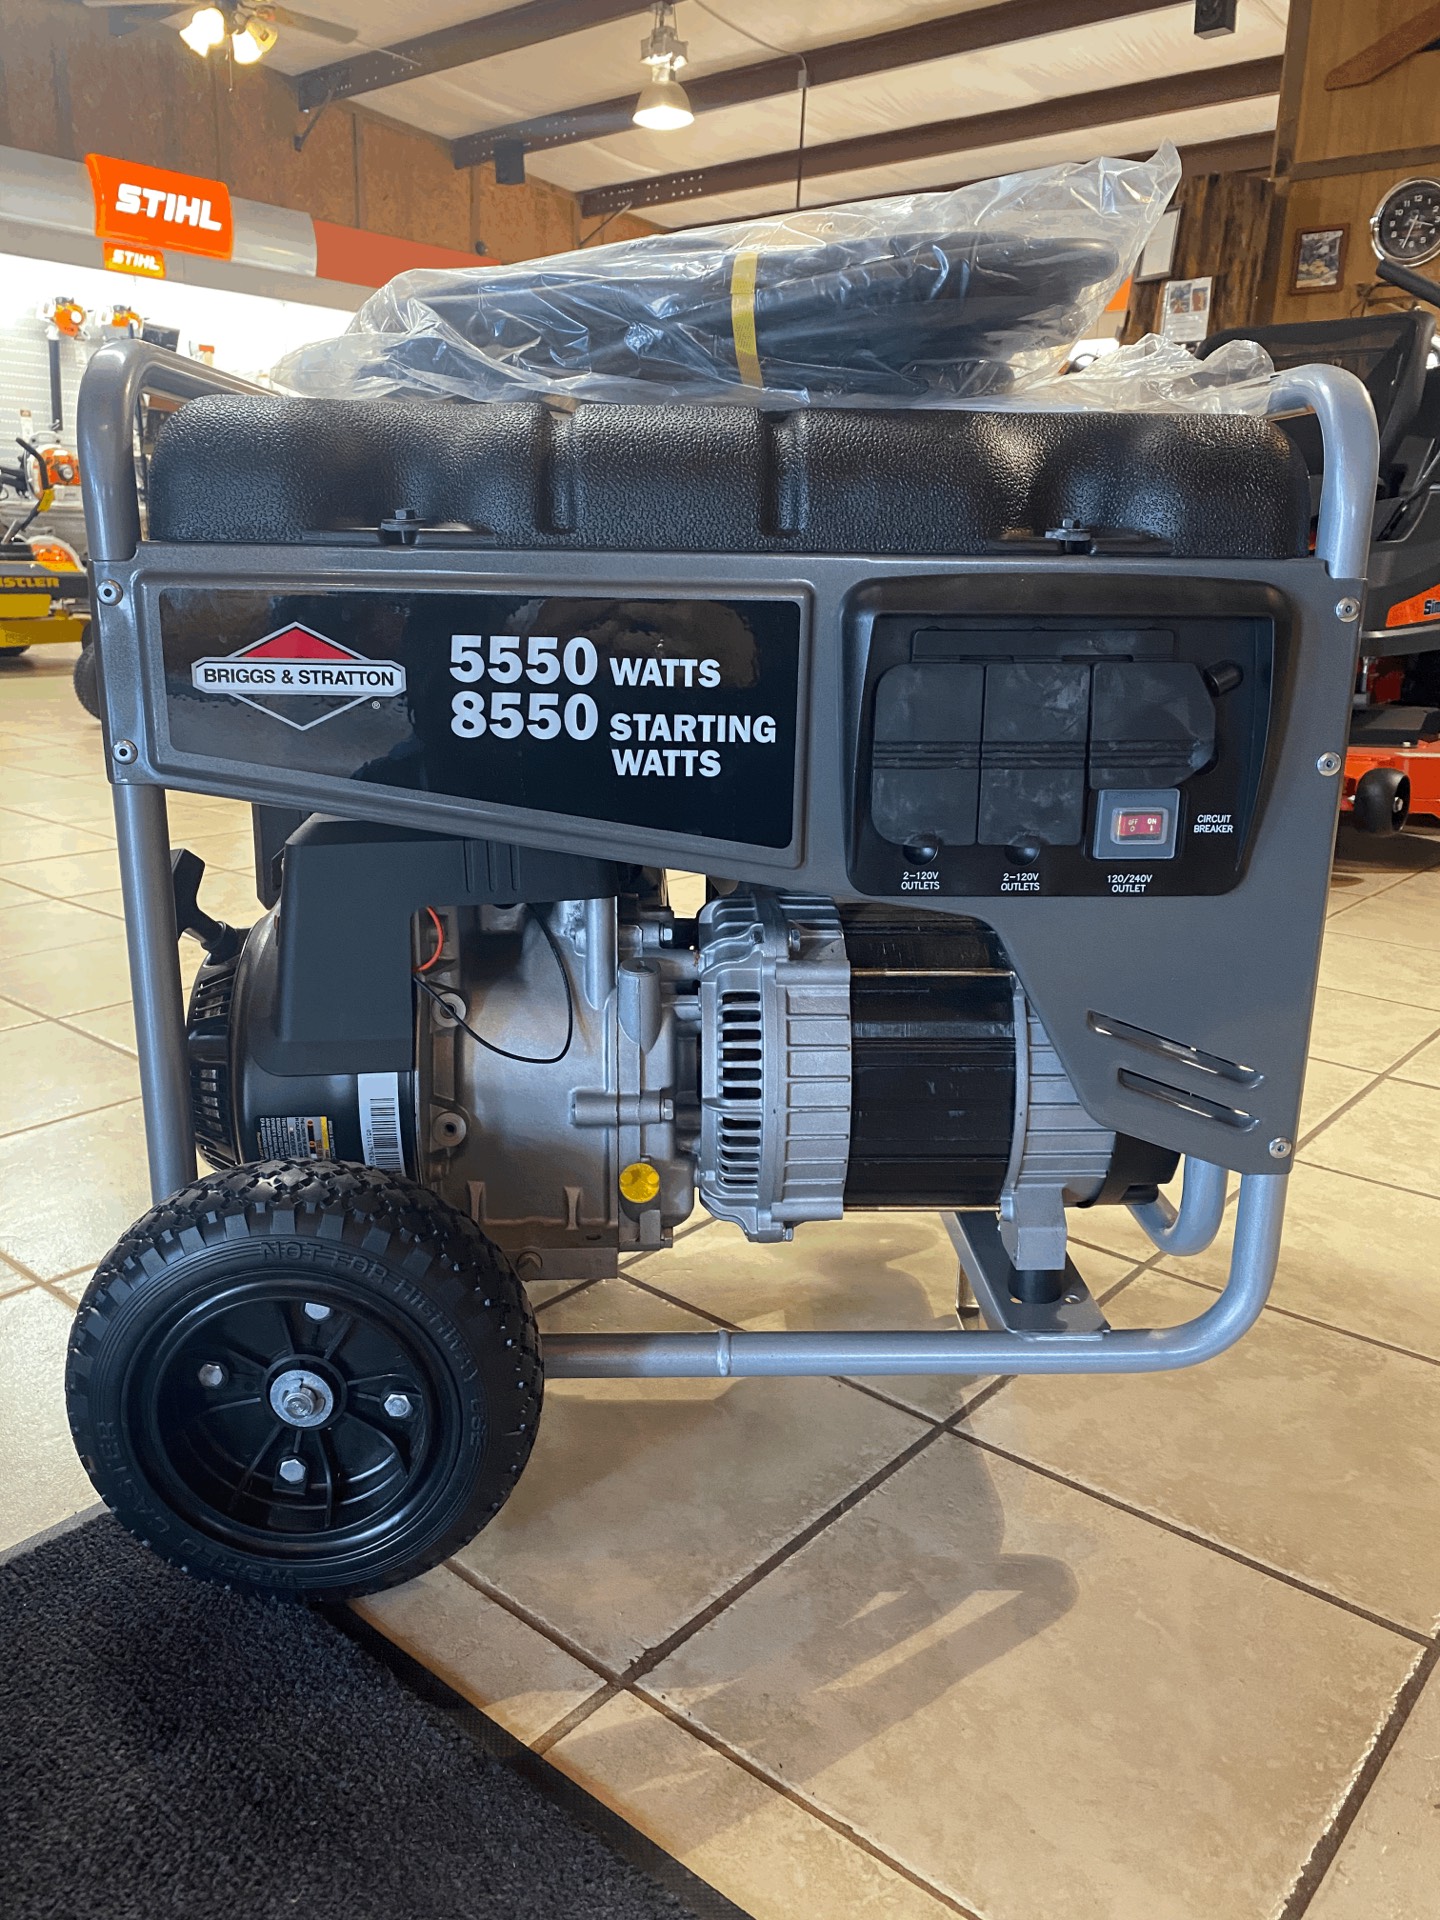 Briggs and stratton generator 5550 watts 8550 starting watts price New Briggs Stratton Generator Generators In Statesville Nc Stock Number N A Greatwesternmotorcycles Com